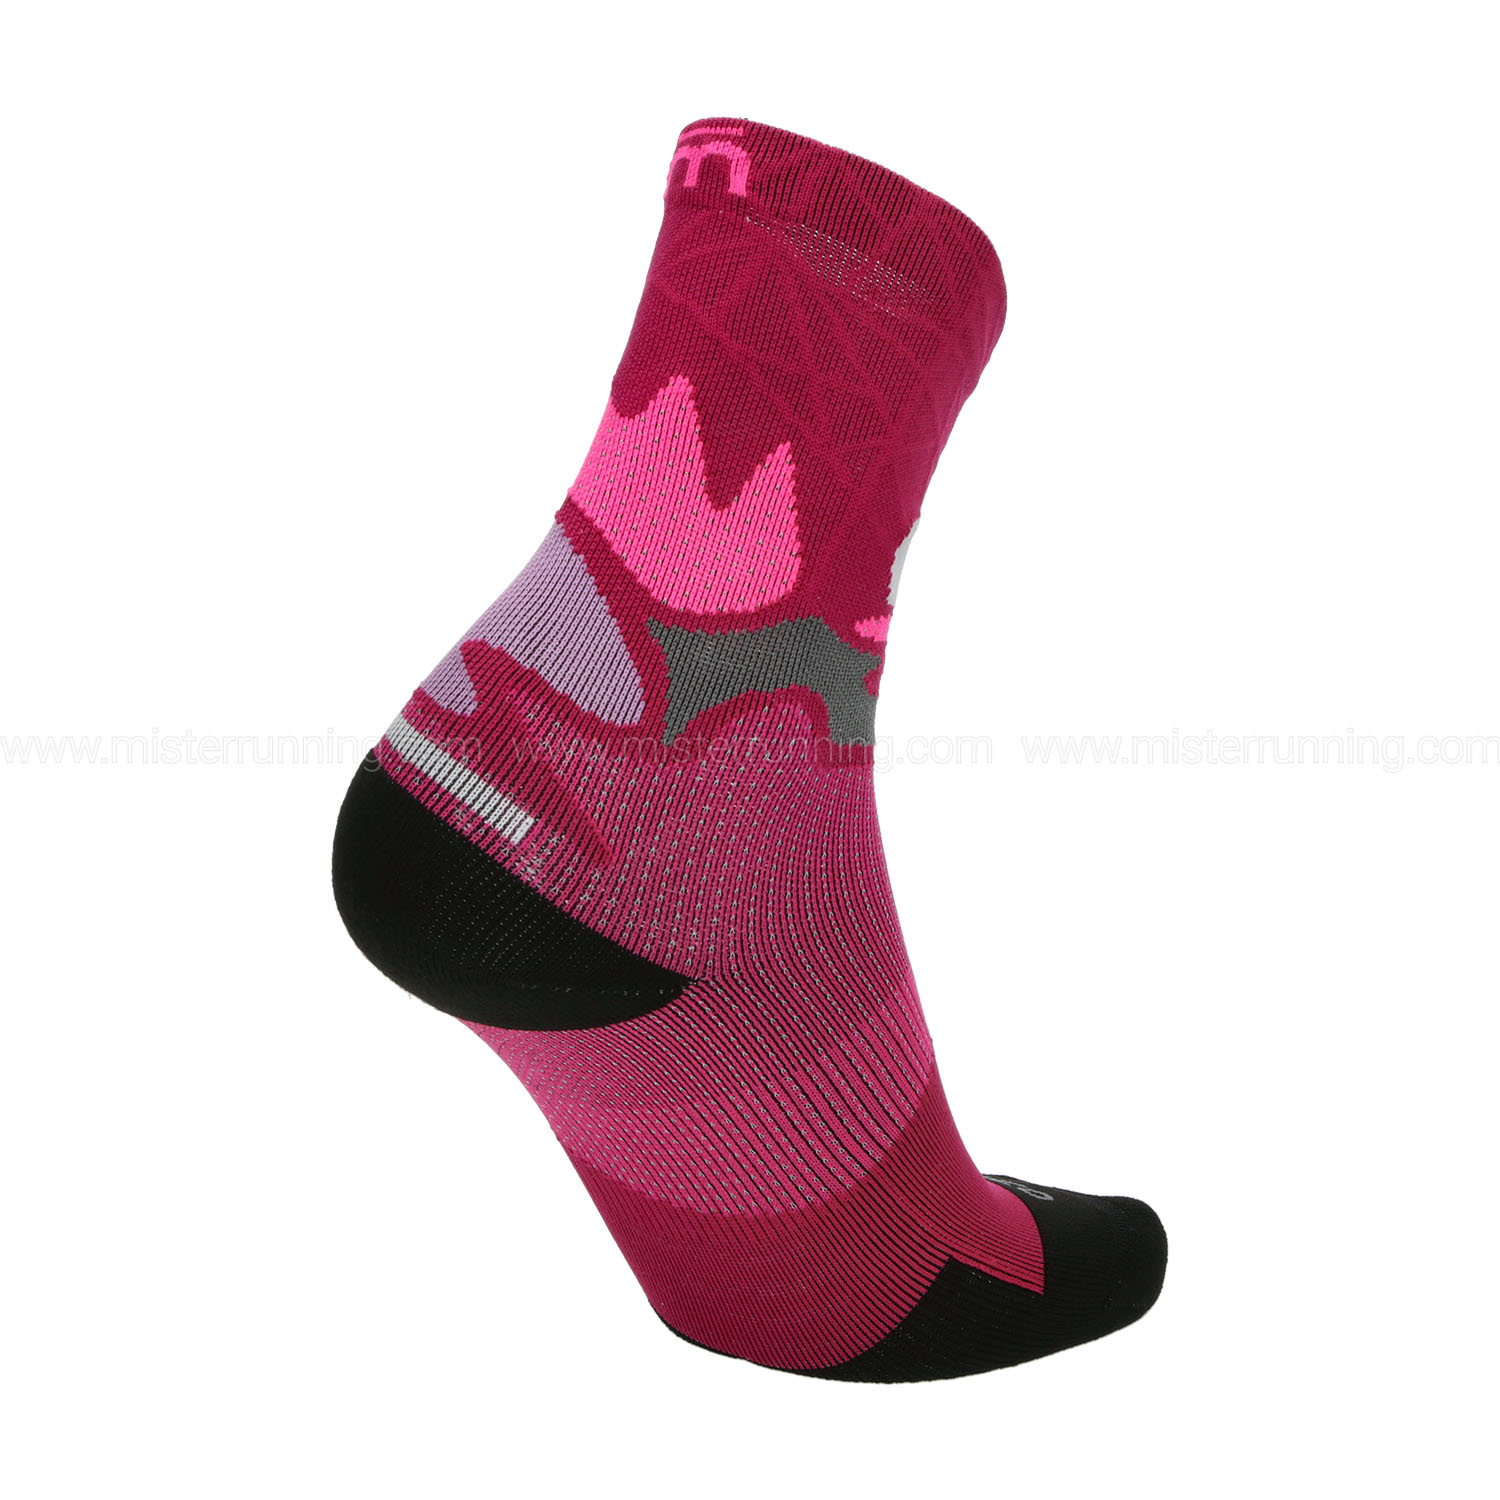 Mico Extra Dry Light Weight Calcetines Mujer - Fucsia